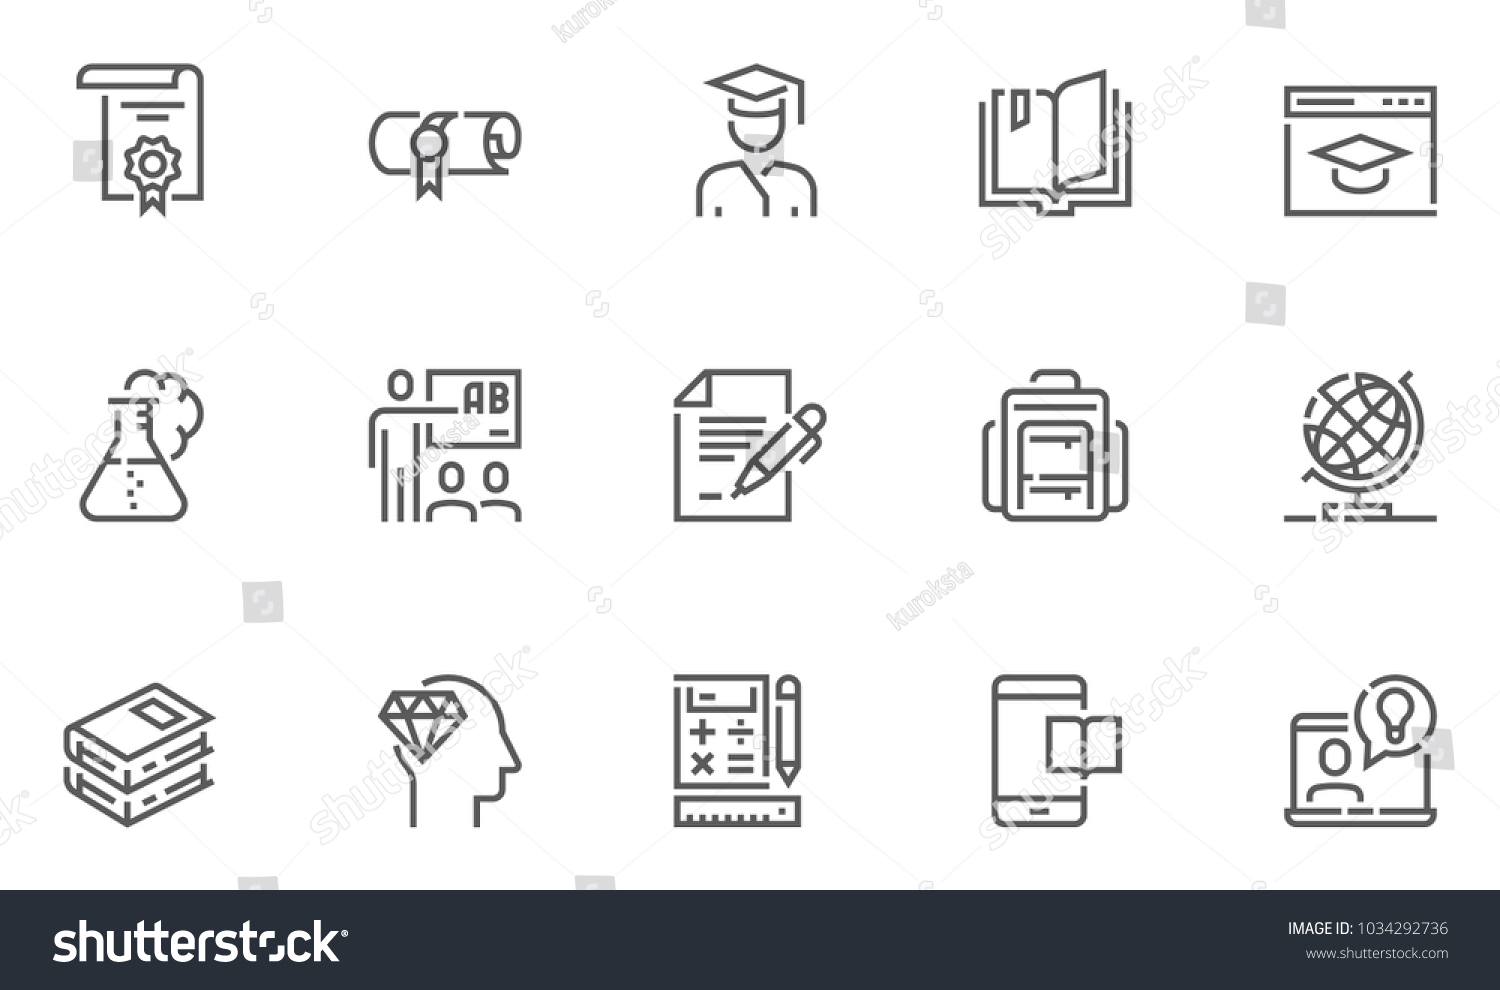 School and University Vector Flat Line Icons Set. Study, Learning, Knowledge, Chemistry, Globe, Classroom, Auditorium. Editable Stroke. 48x48 Pixel Perfect. #1034292736